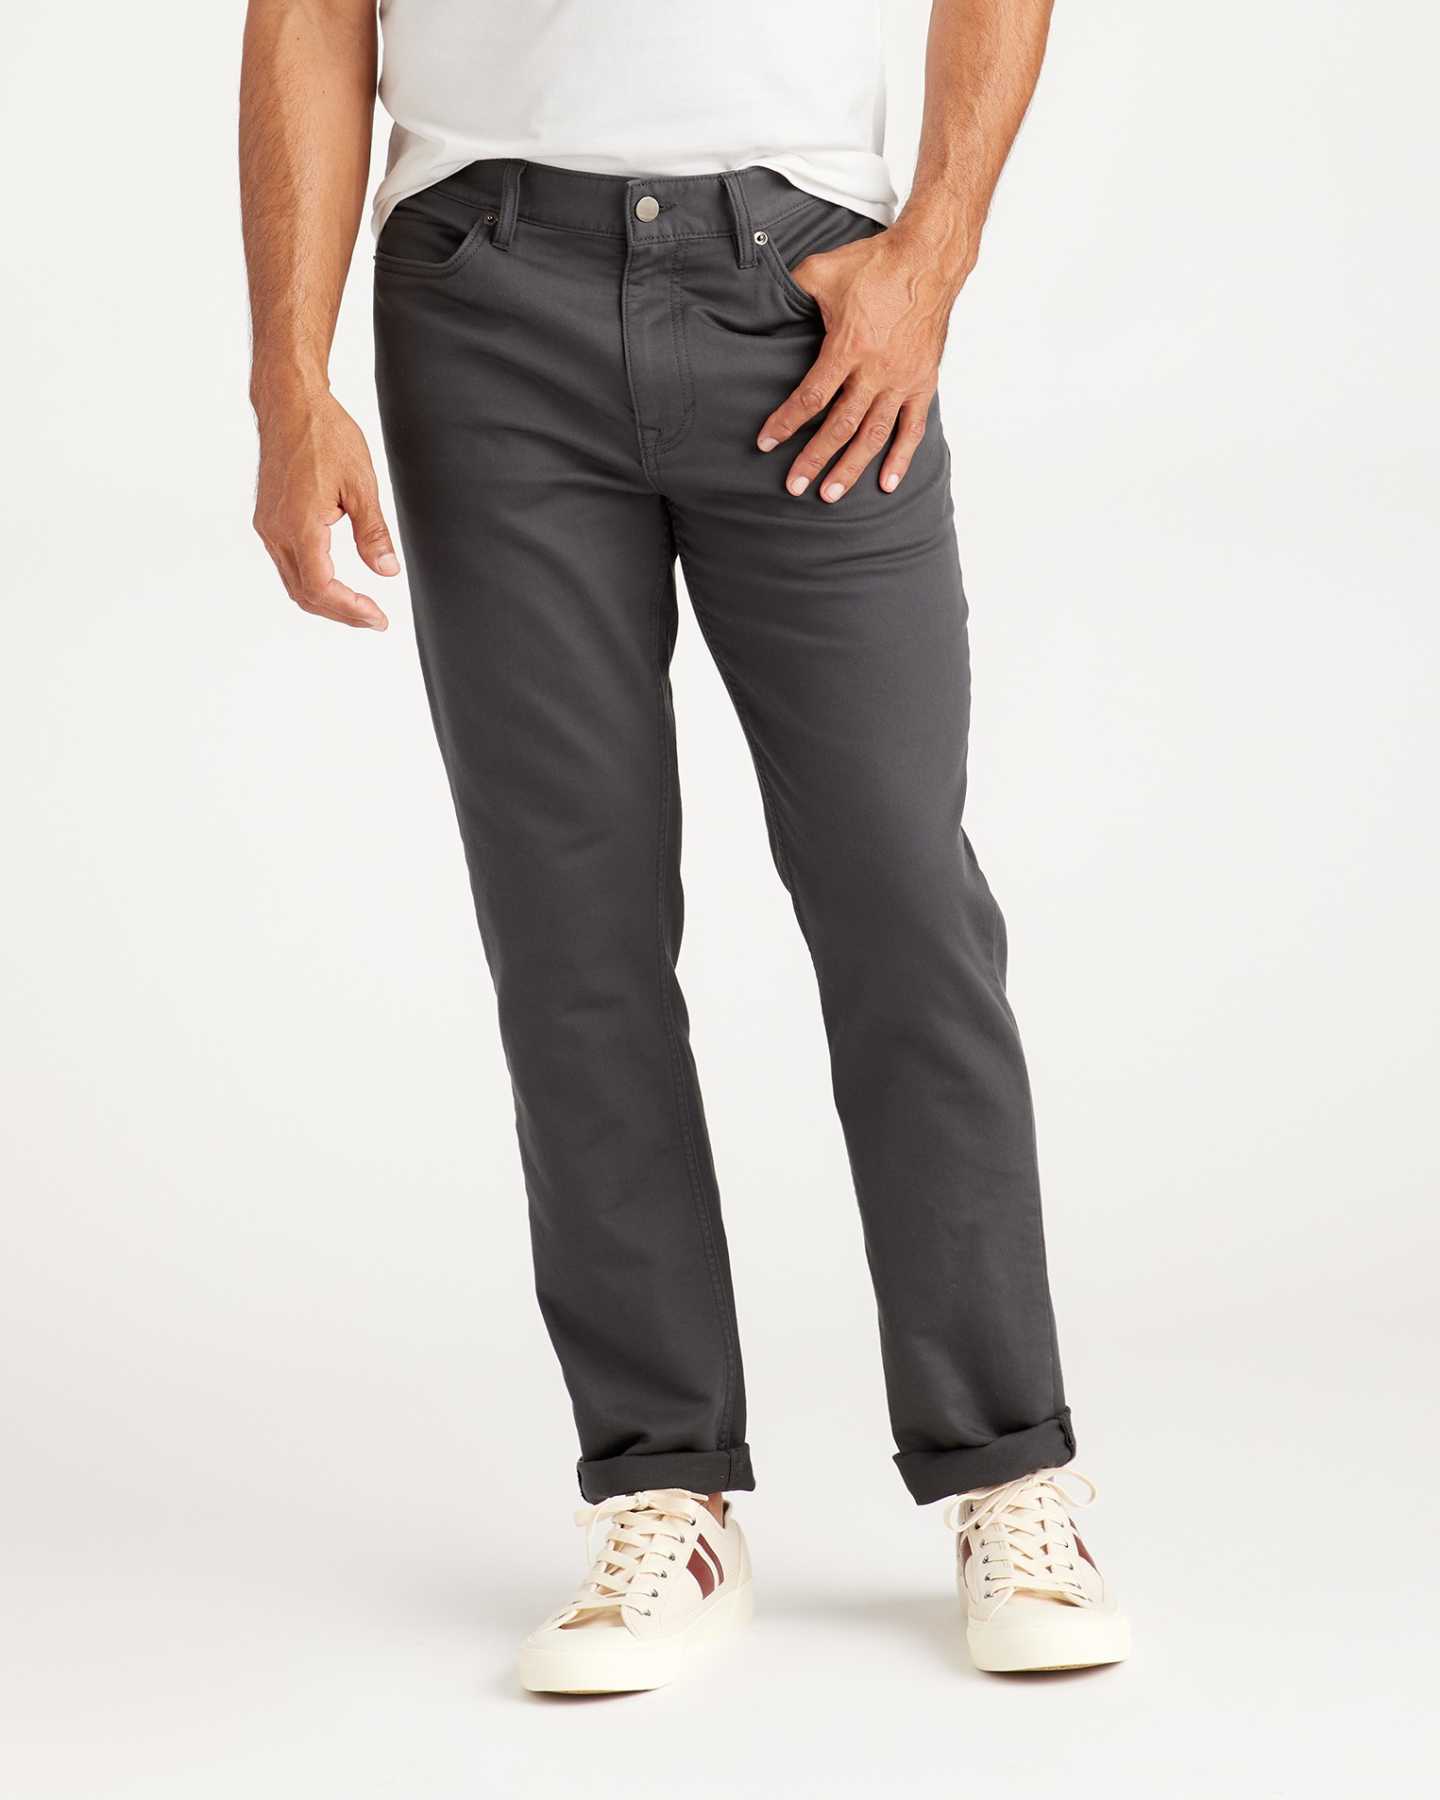 You May Also Like - Comfort Stretch Traveler 5-Pocket Pant - Dark Charcoal